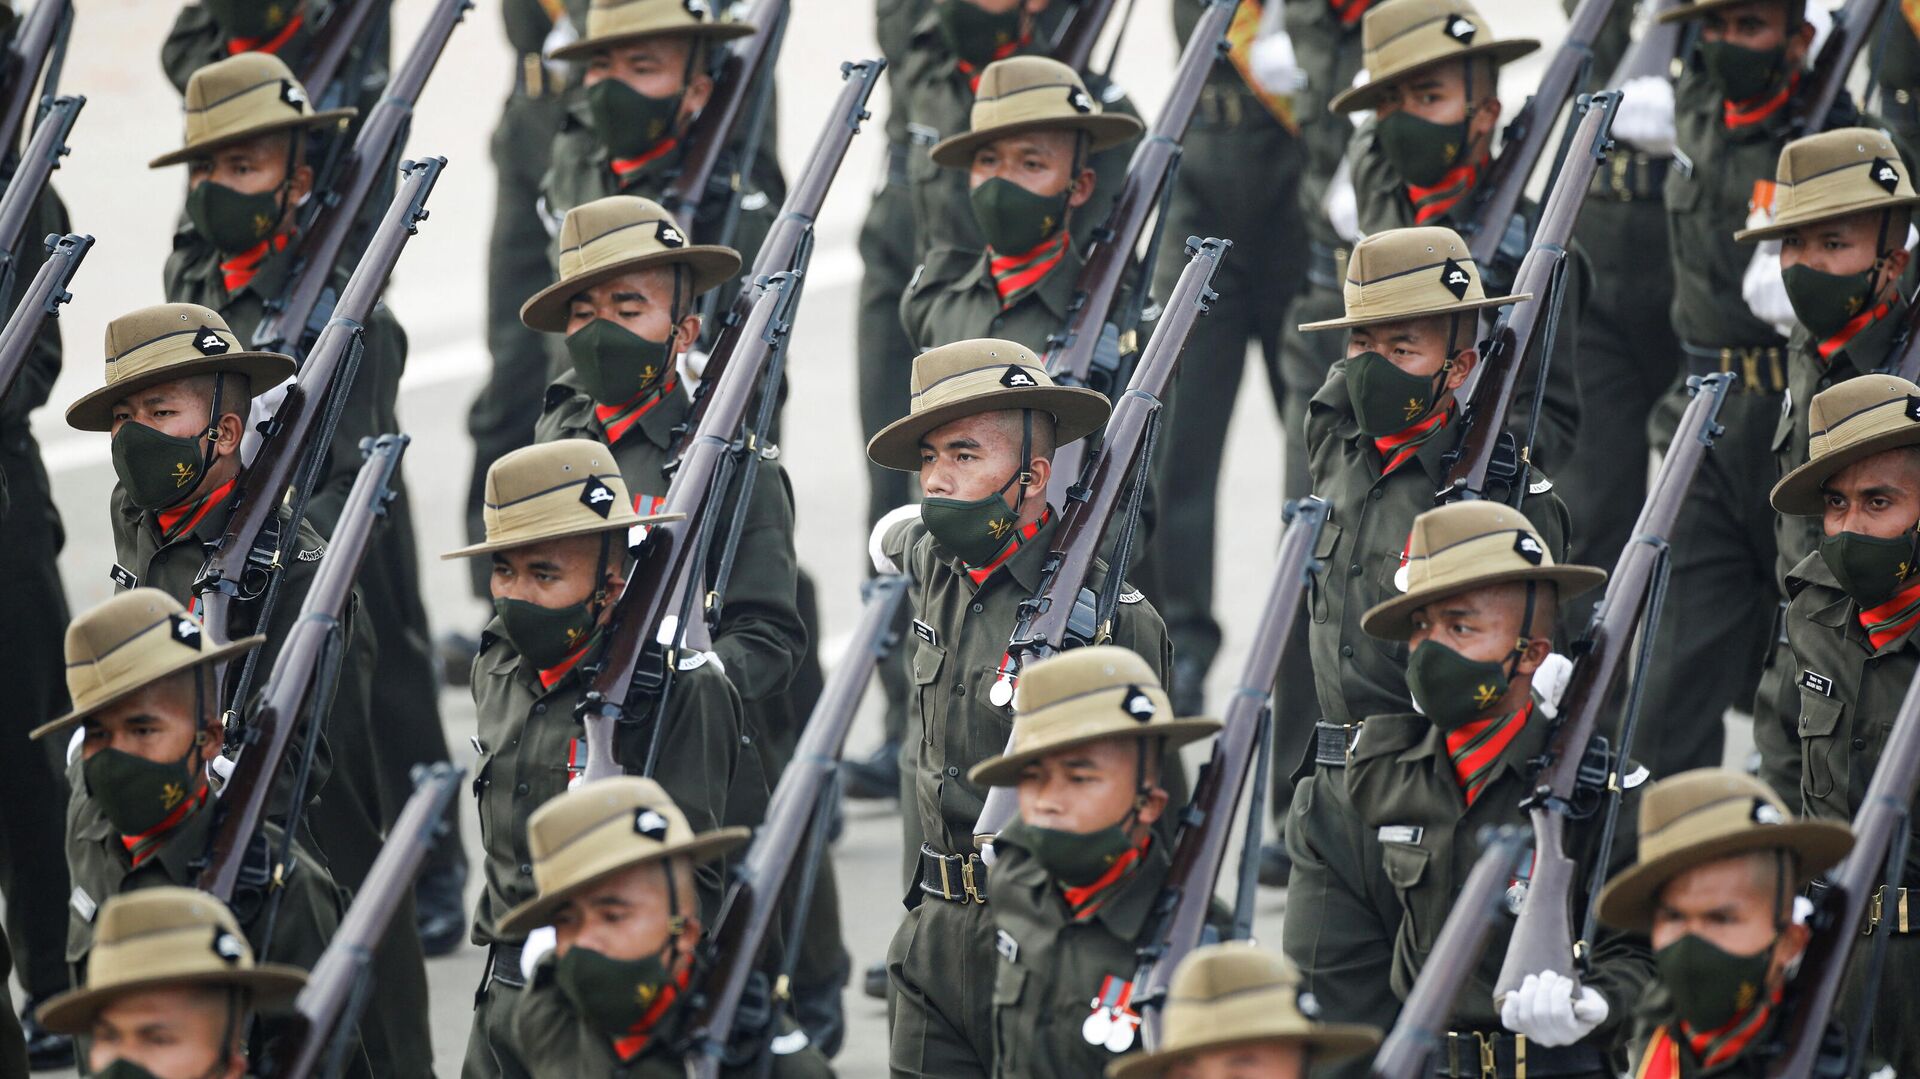  Indian soldiers march during the Republic Day parade in New Delhi, India, January 26, 2022 - Sputnik International, 1920, 26.01.2022